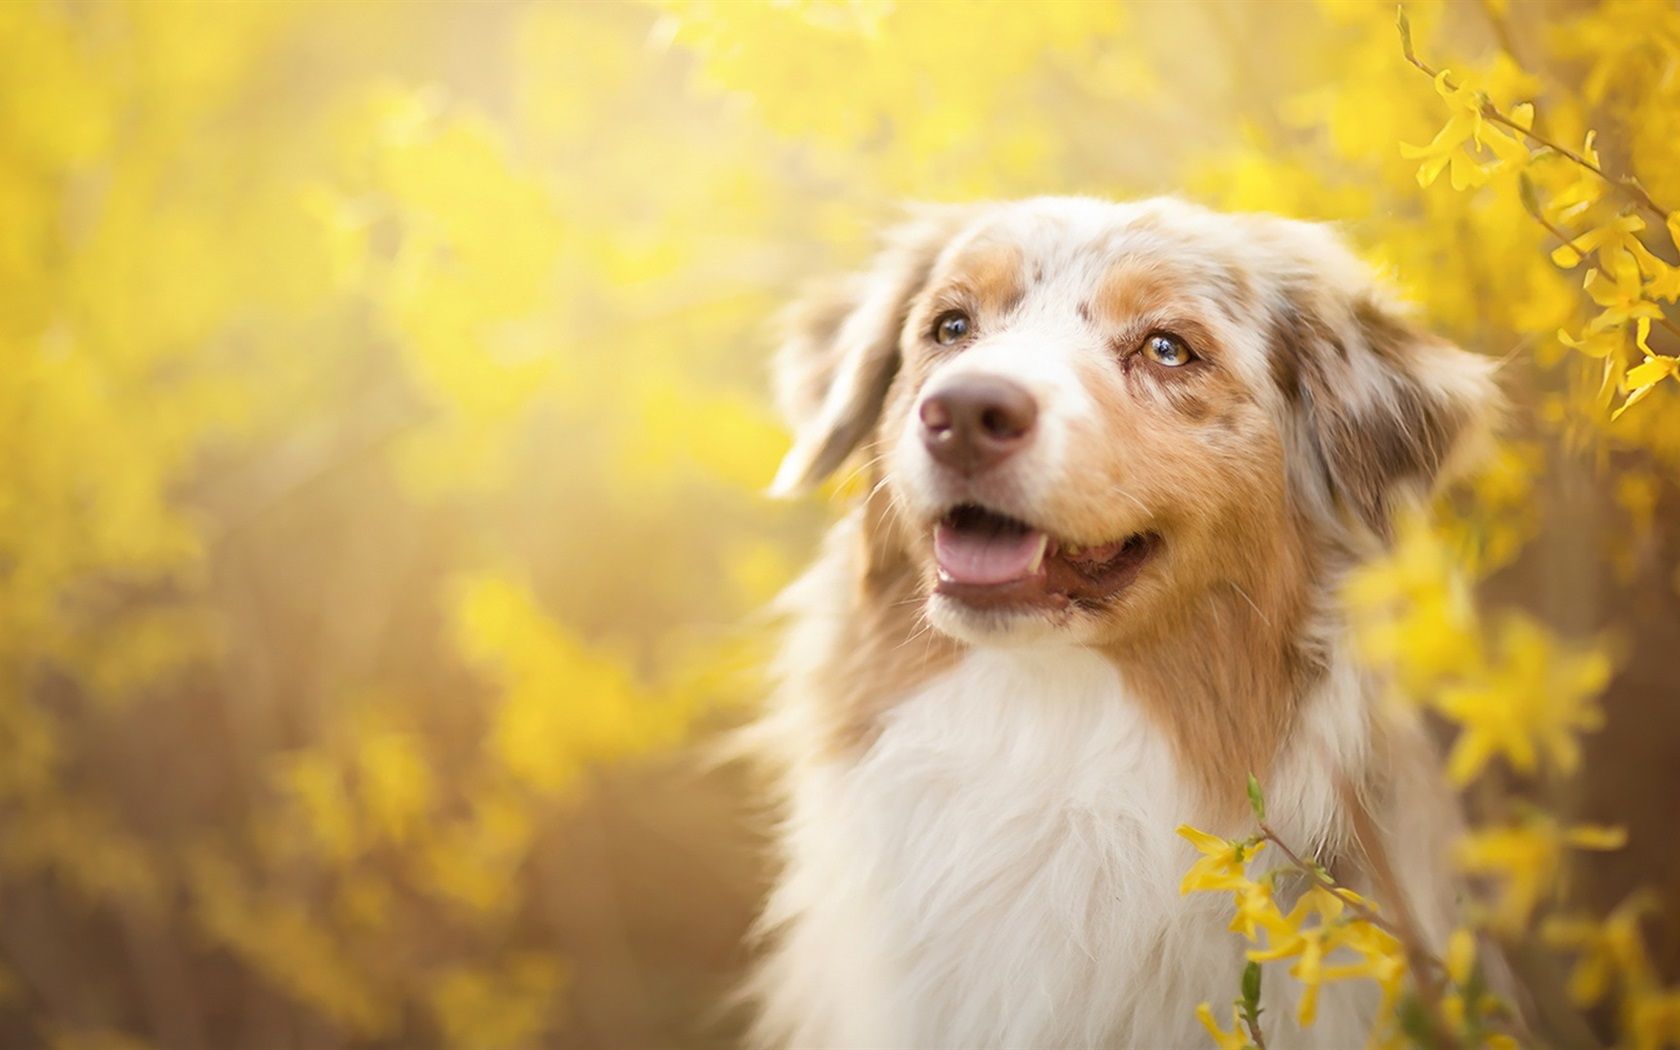 Wallpaper Dog, yellow flowers, spring 1920x1080 Full HD 2K Picture